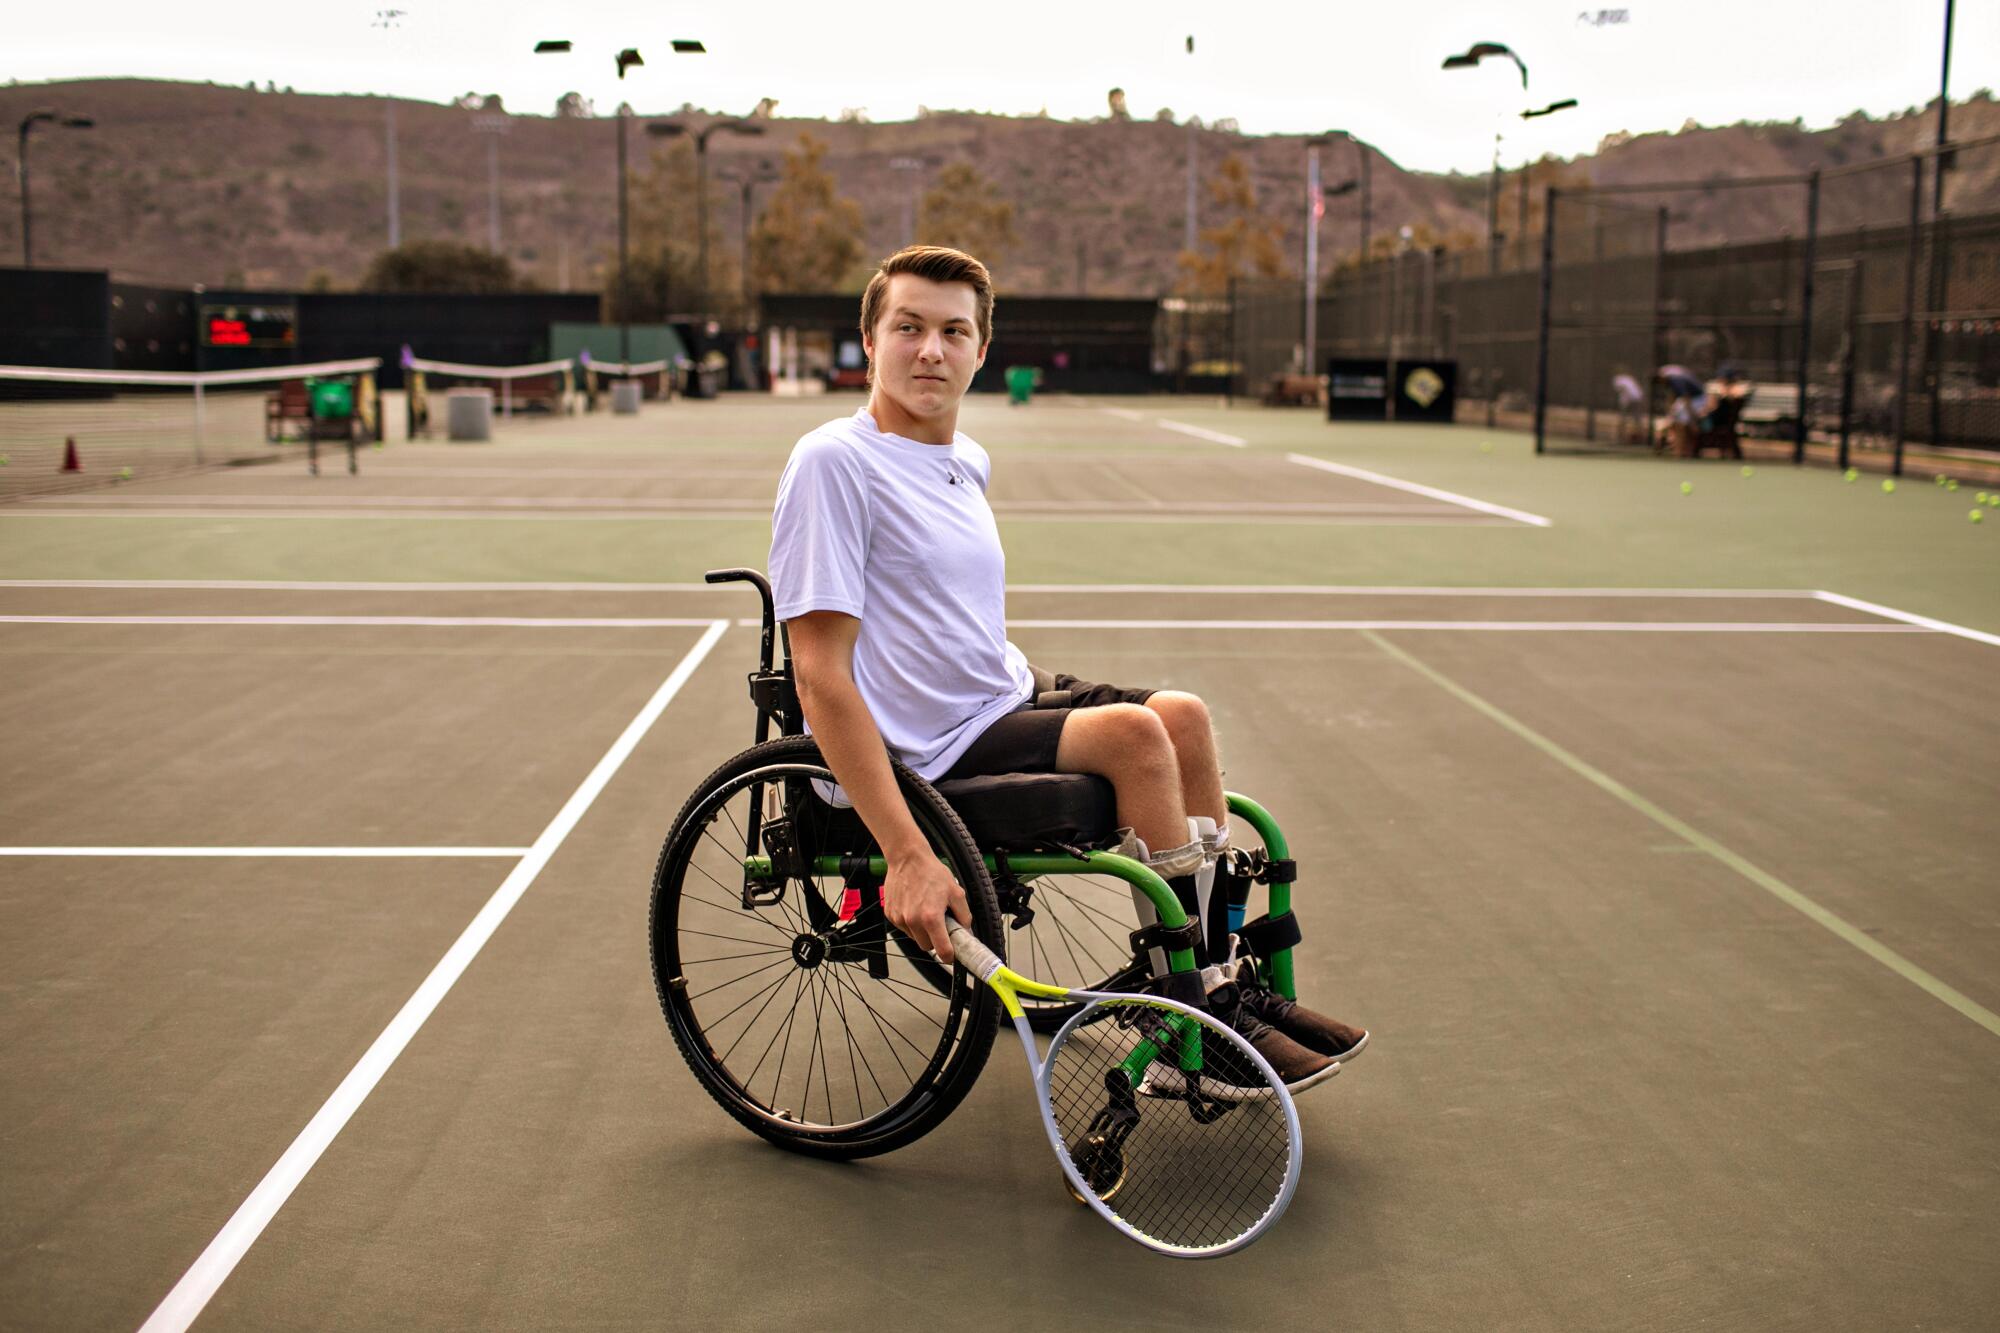 Landon Sachs, an adaptive tennis player who is paralyzed, poses for a portrait in San Juan Capistrano.